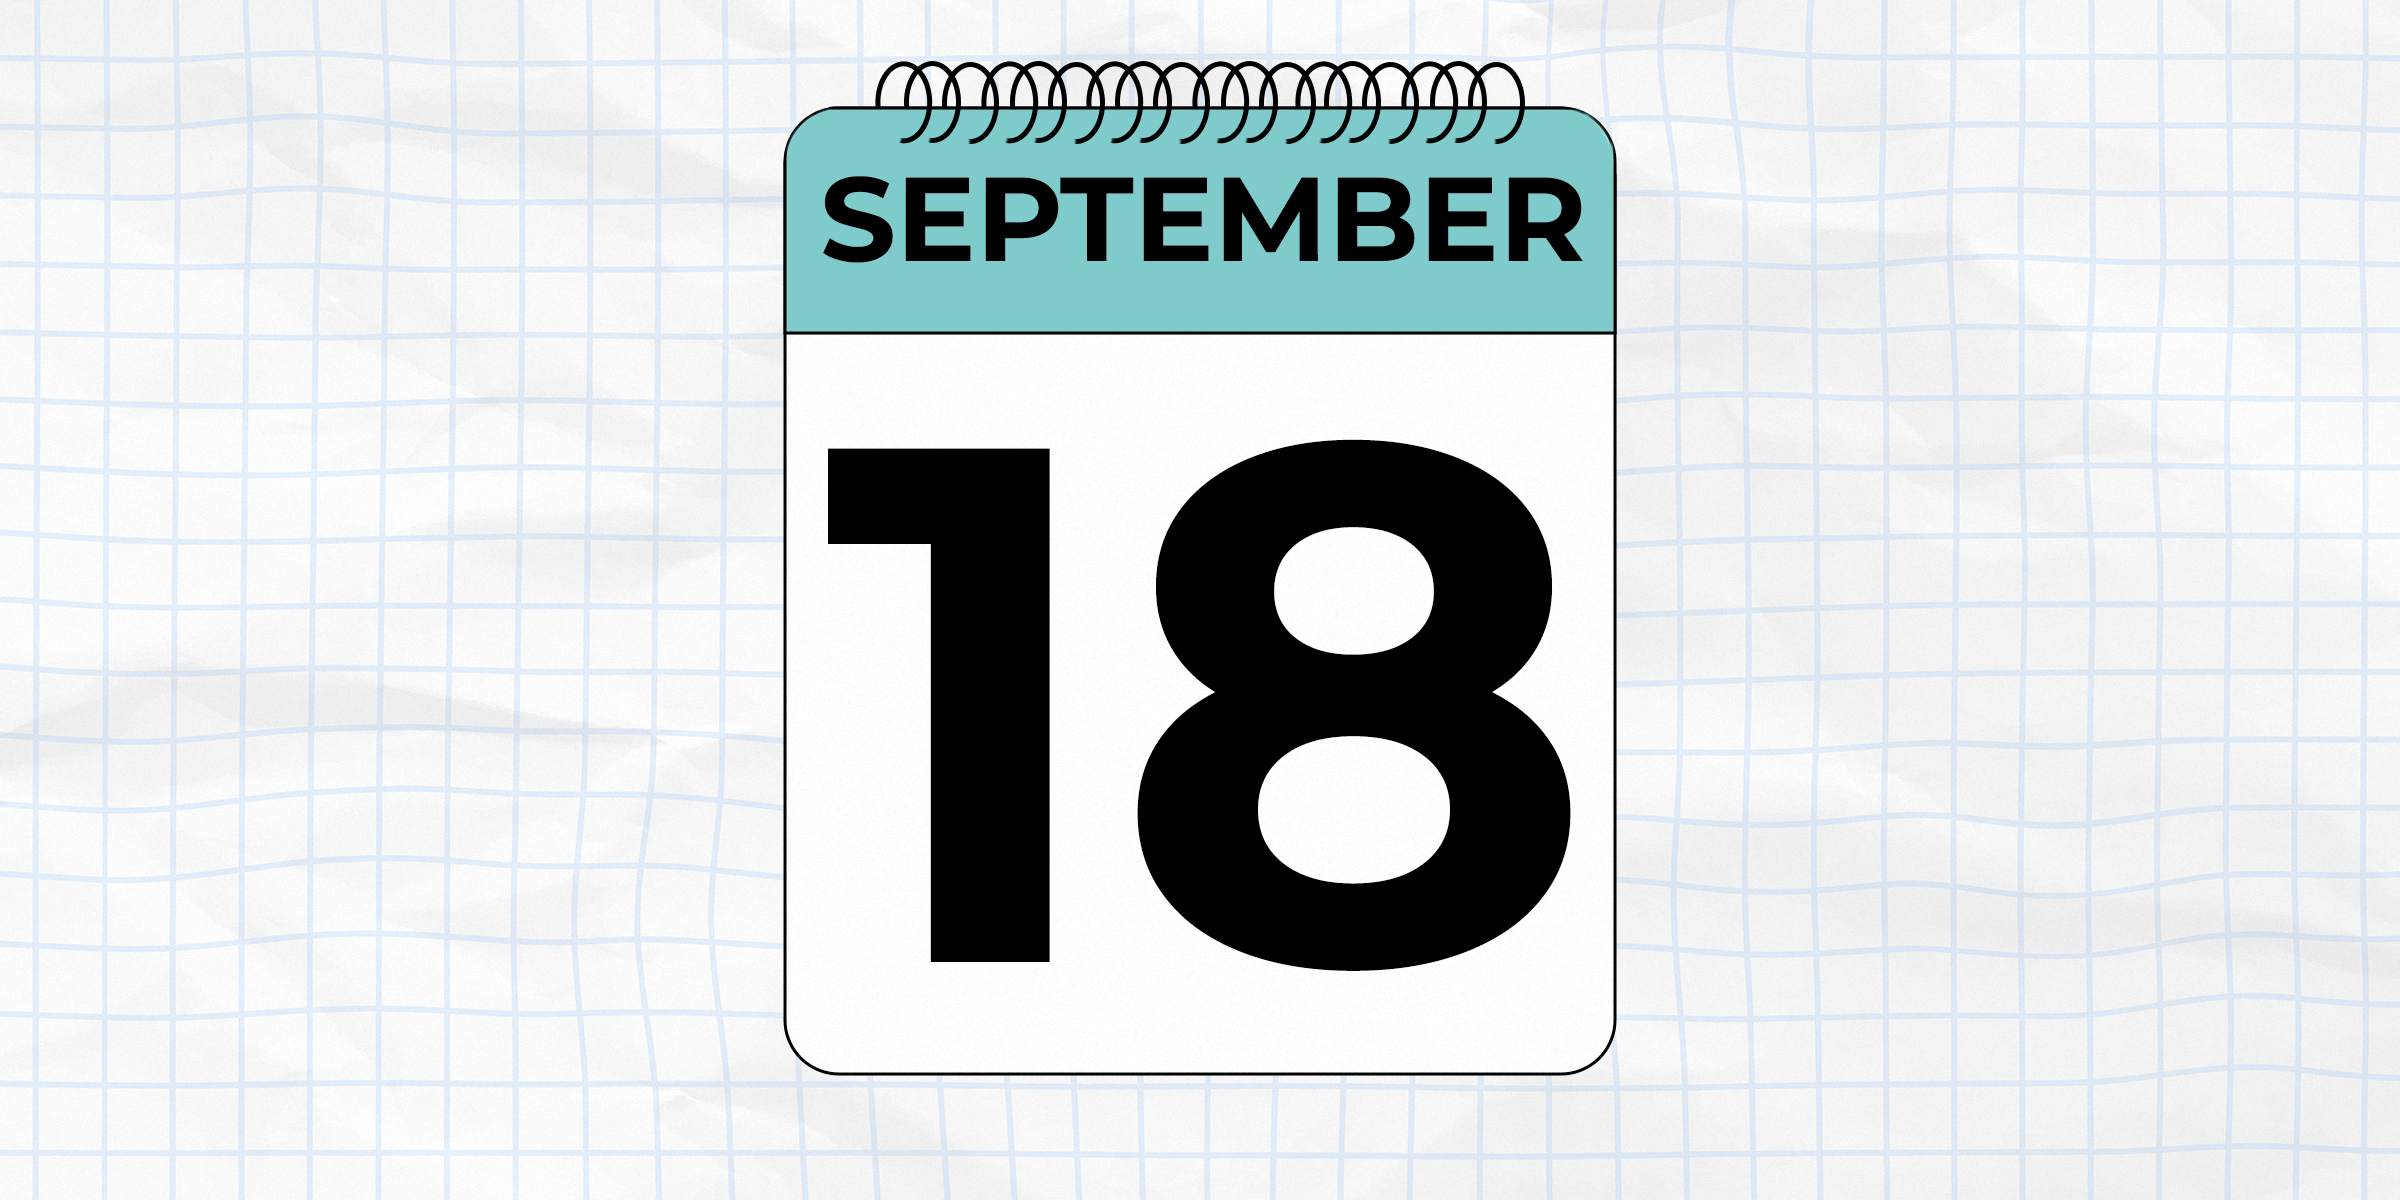 A calendar set to the date September 18 | Source: Amomama